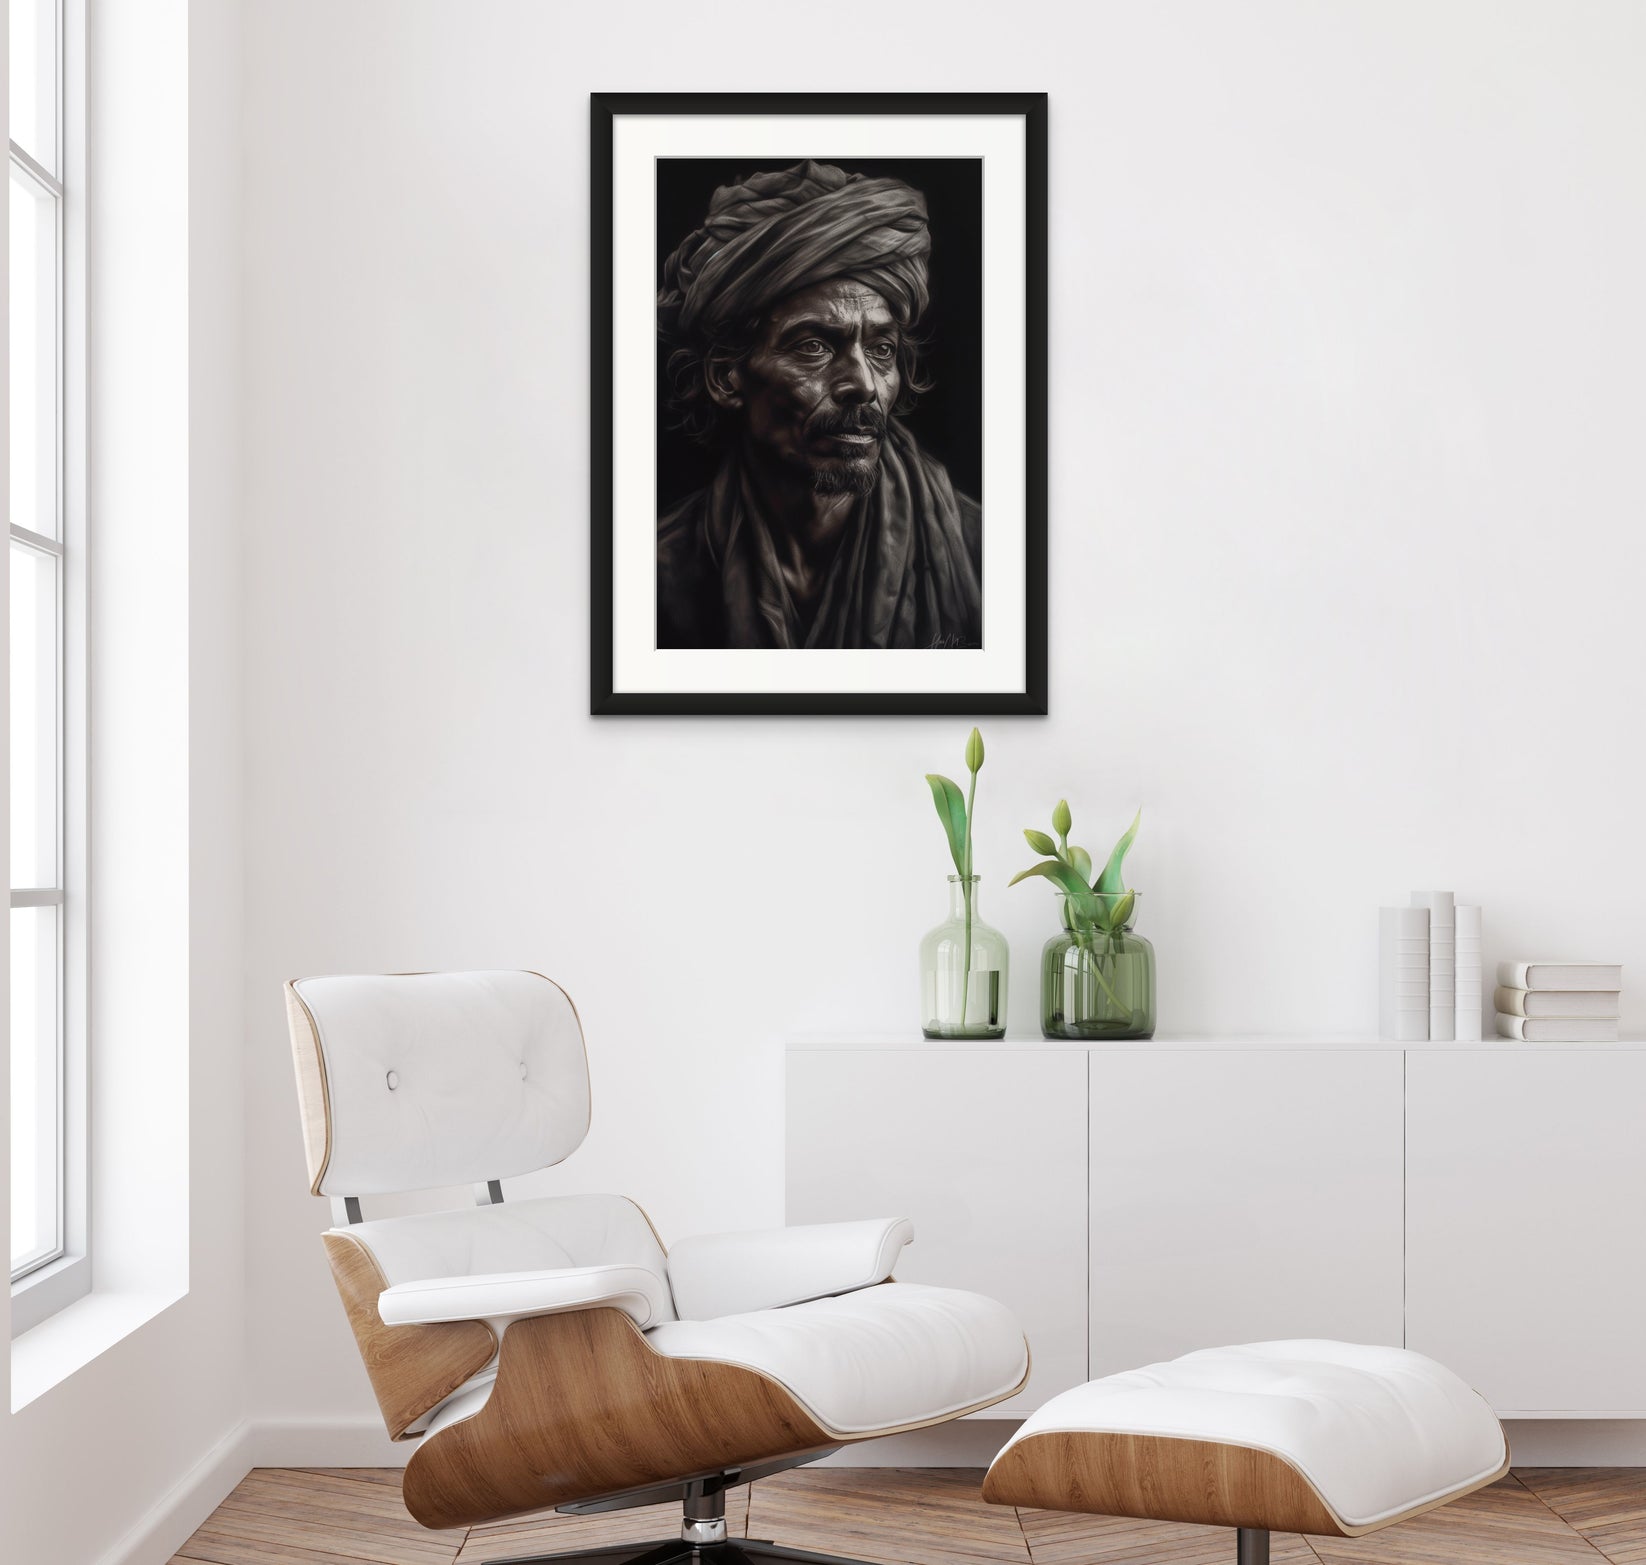 Exquisite Charcoal Portrait Print of a Traditional Indian Gentleman